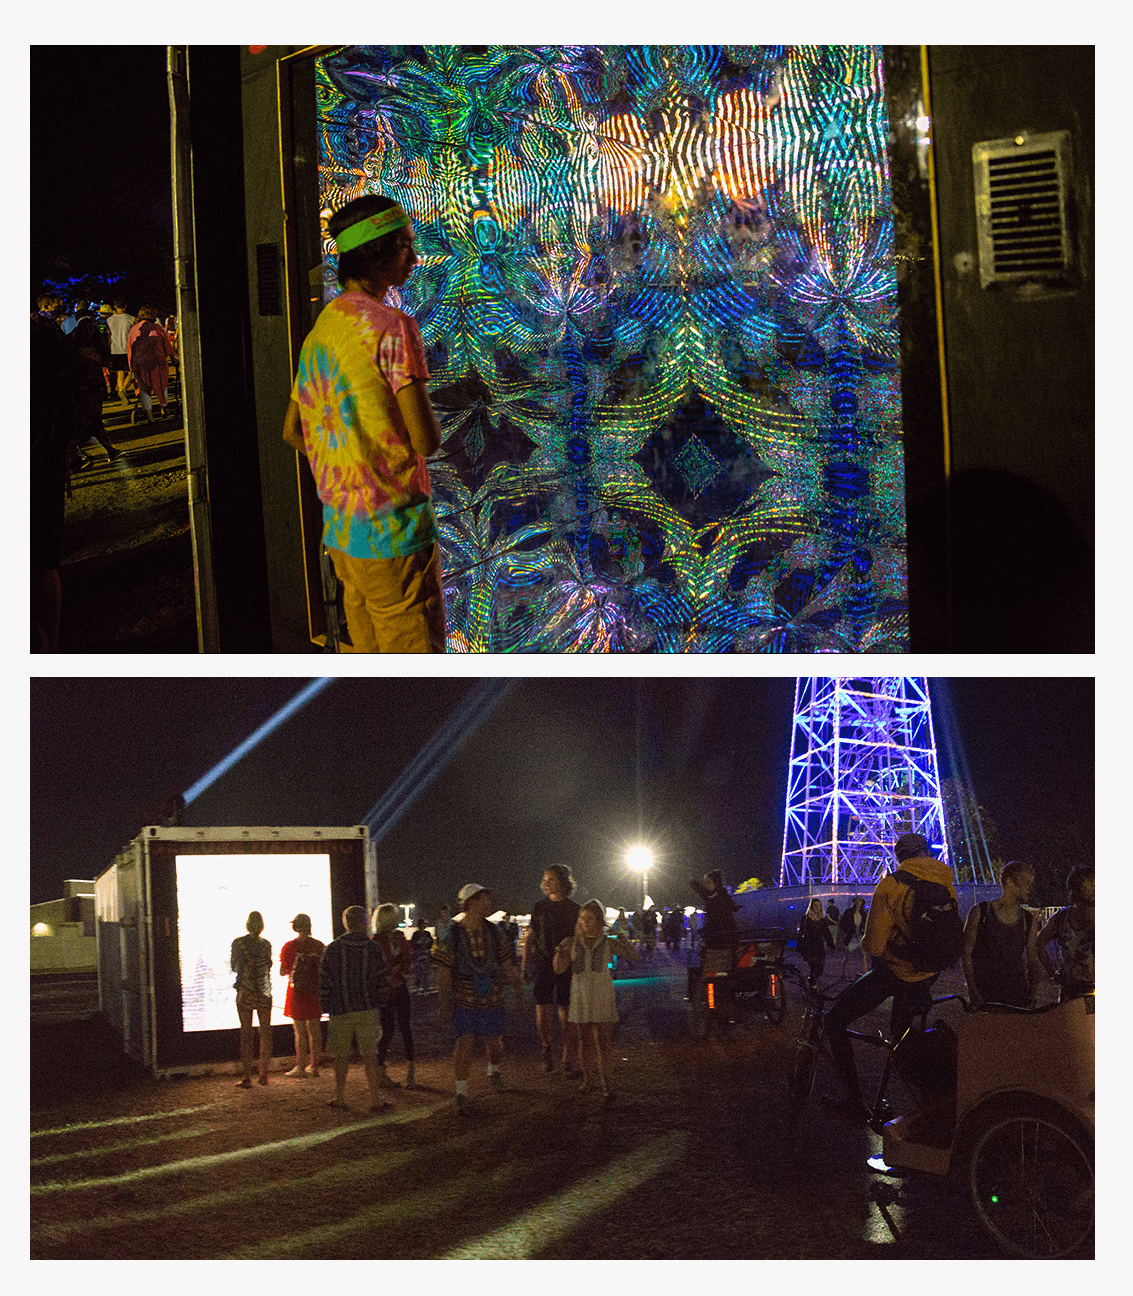 Photos of people interacting with the Infinity Mirror kaleidoscope art installation at Bonnaroo Music & Arts Festival in Manchester, Tennessee